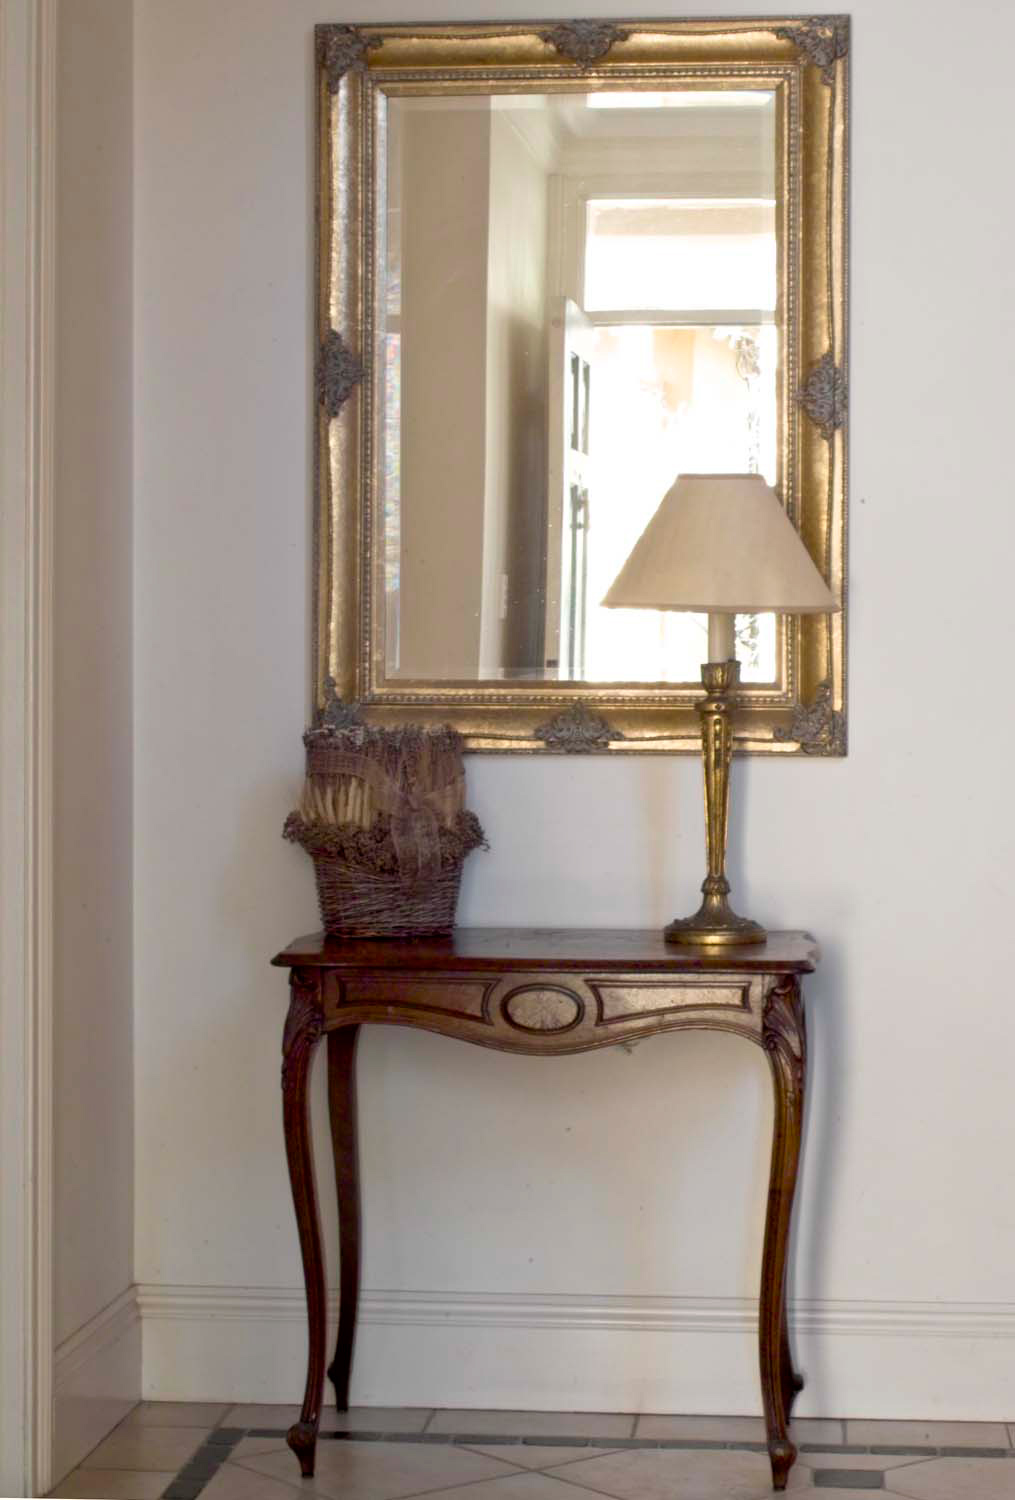 4 Entrance with Louis XV timber hall table, table lamp and mirror with gilding finishes